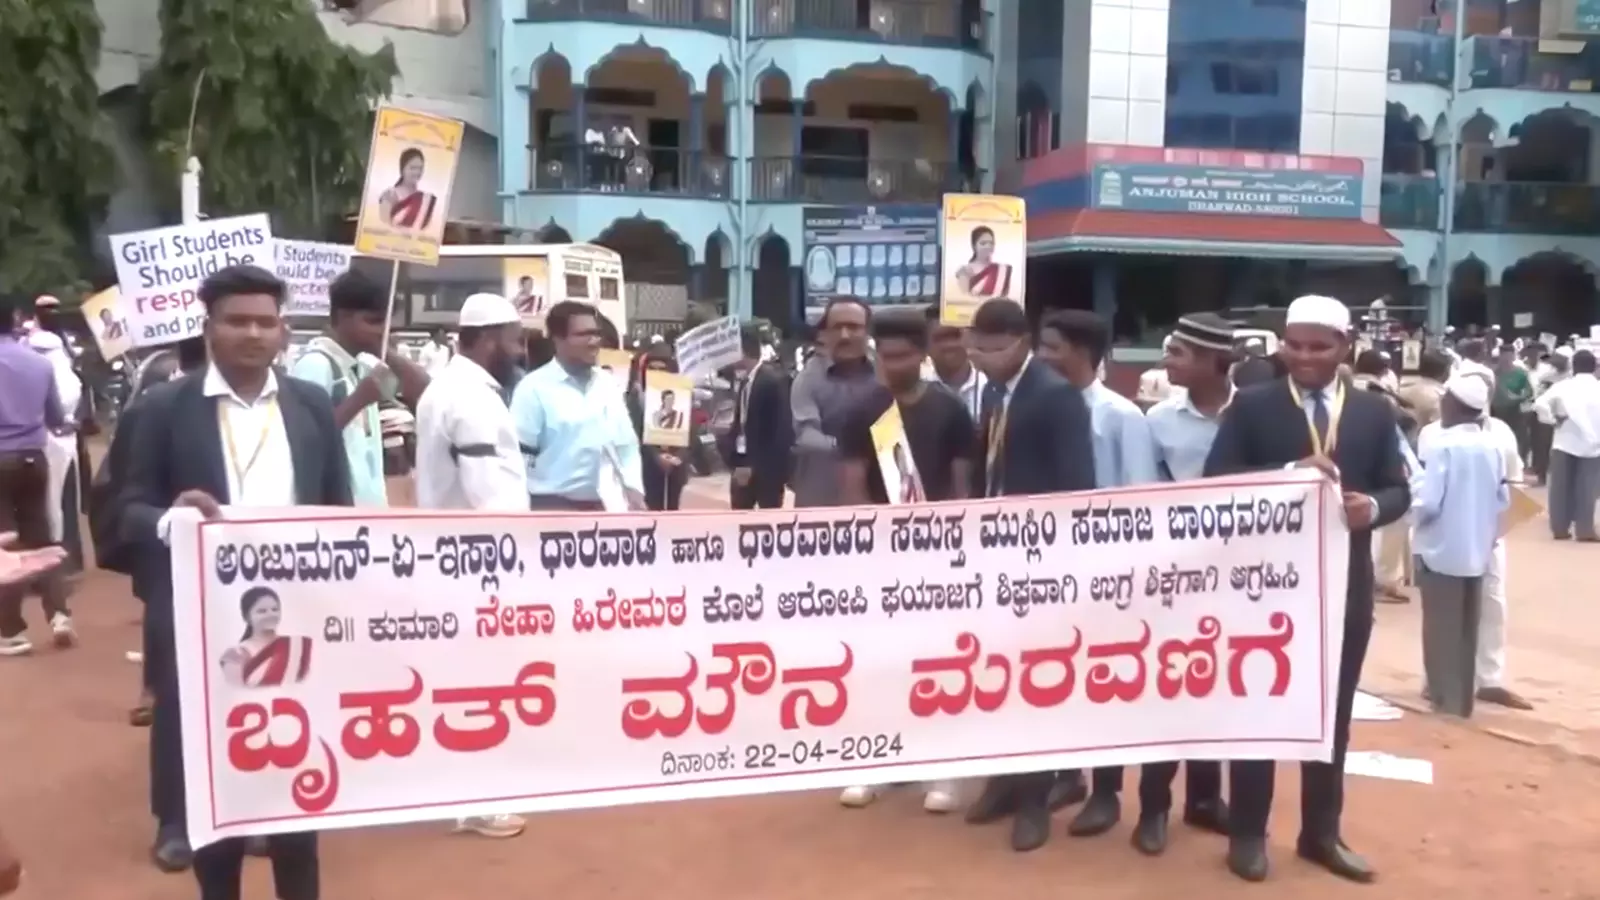 Dharwad Muslims observe half-day bandh in protest against Nehas murder